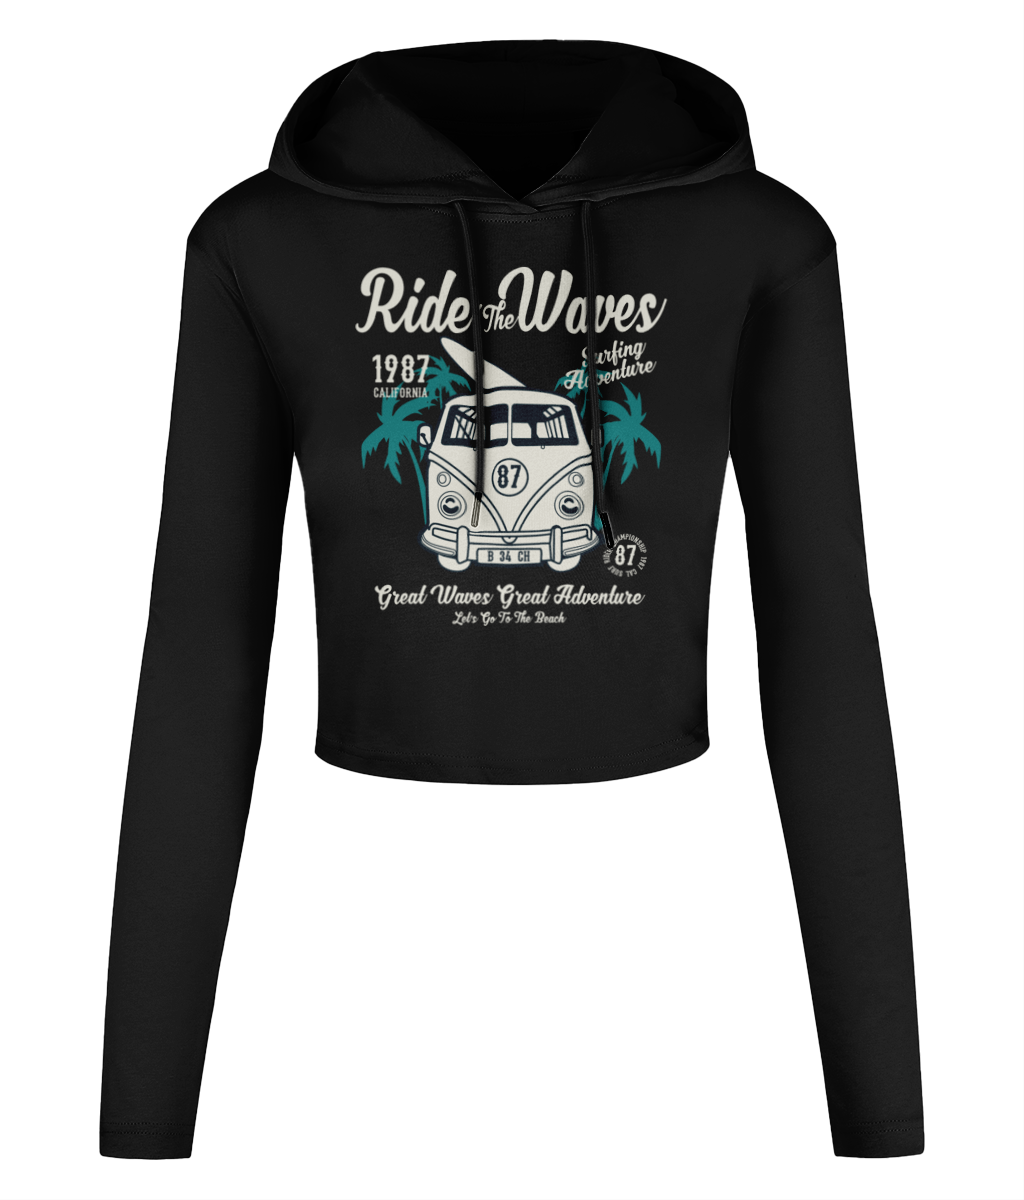 Ride The Waves – Women’s Cropped Hooded T-shirt